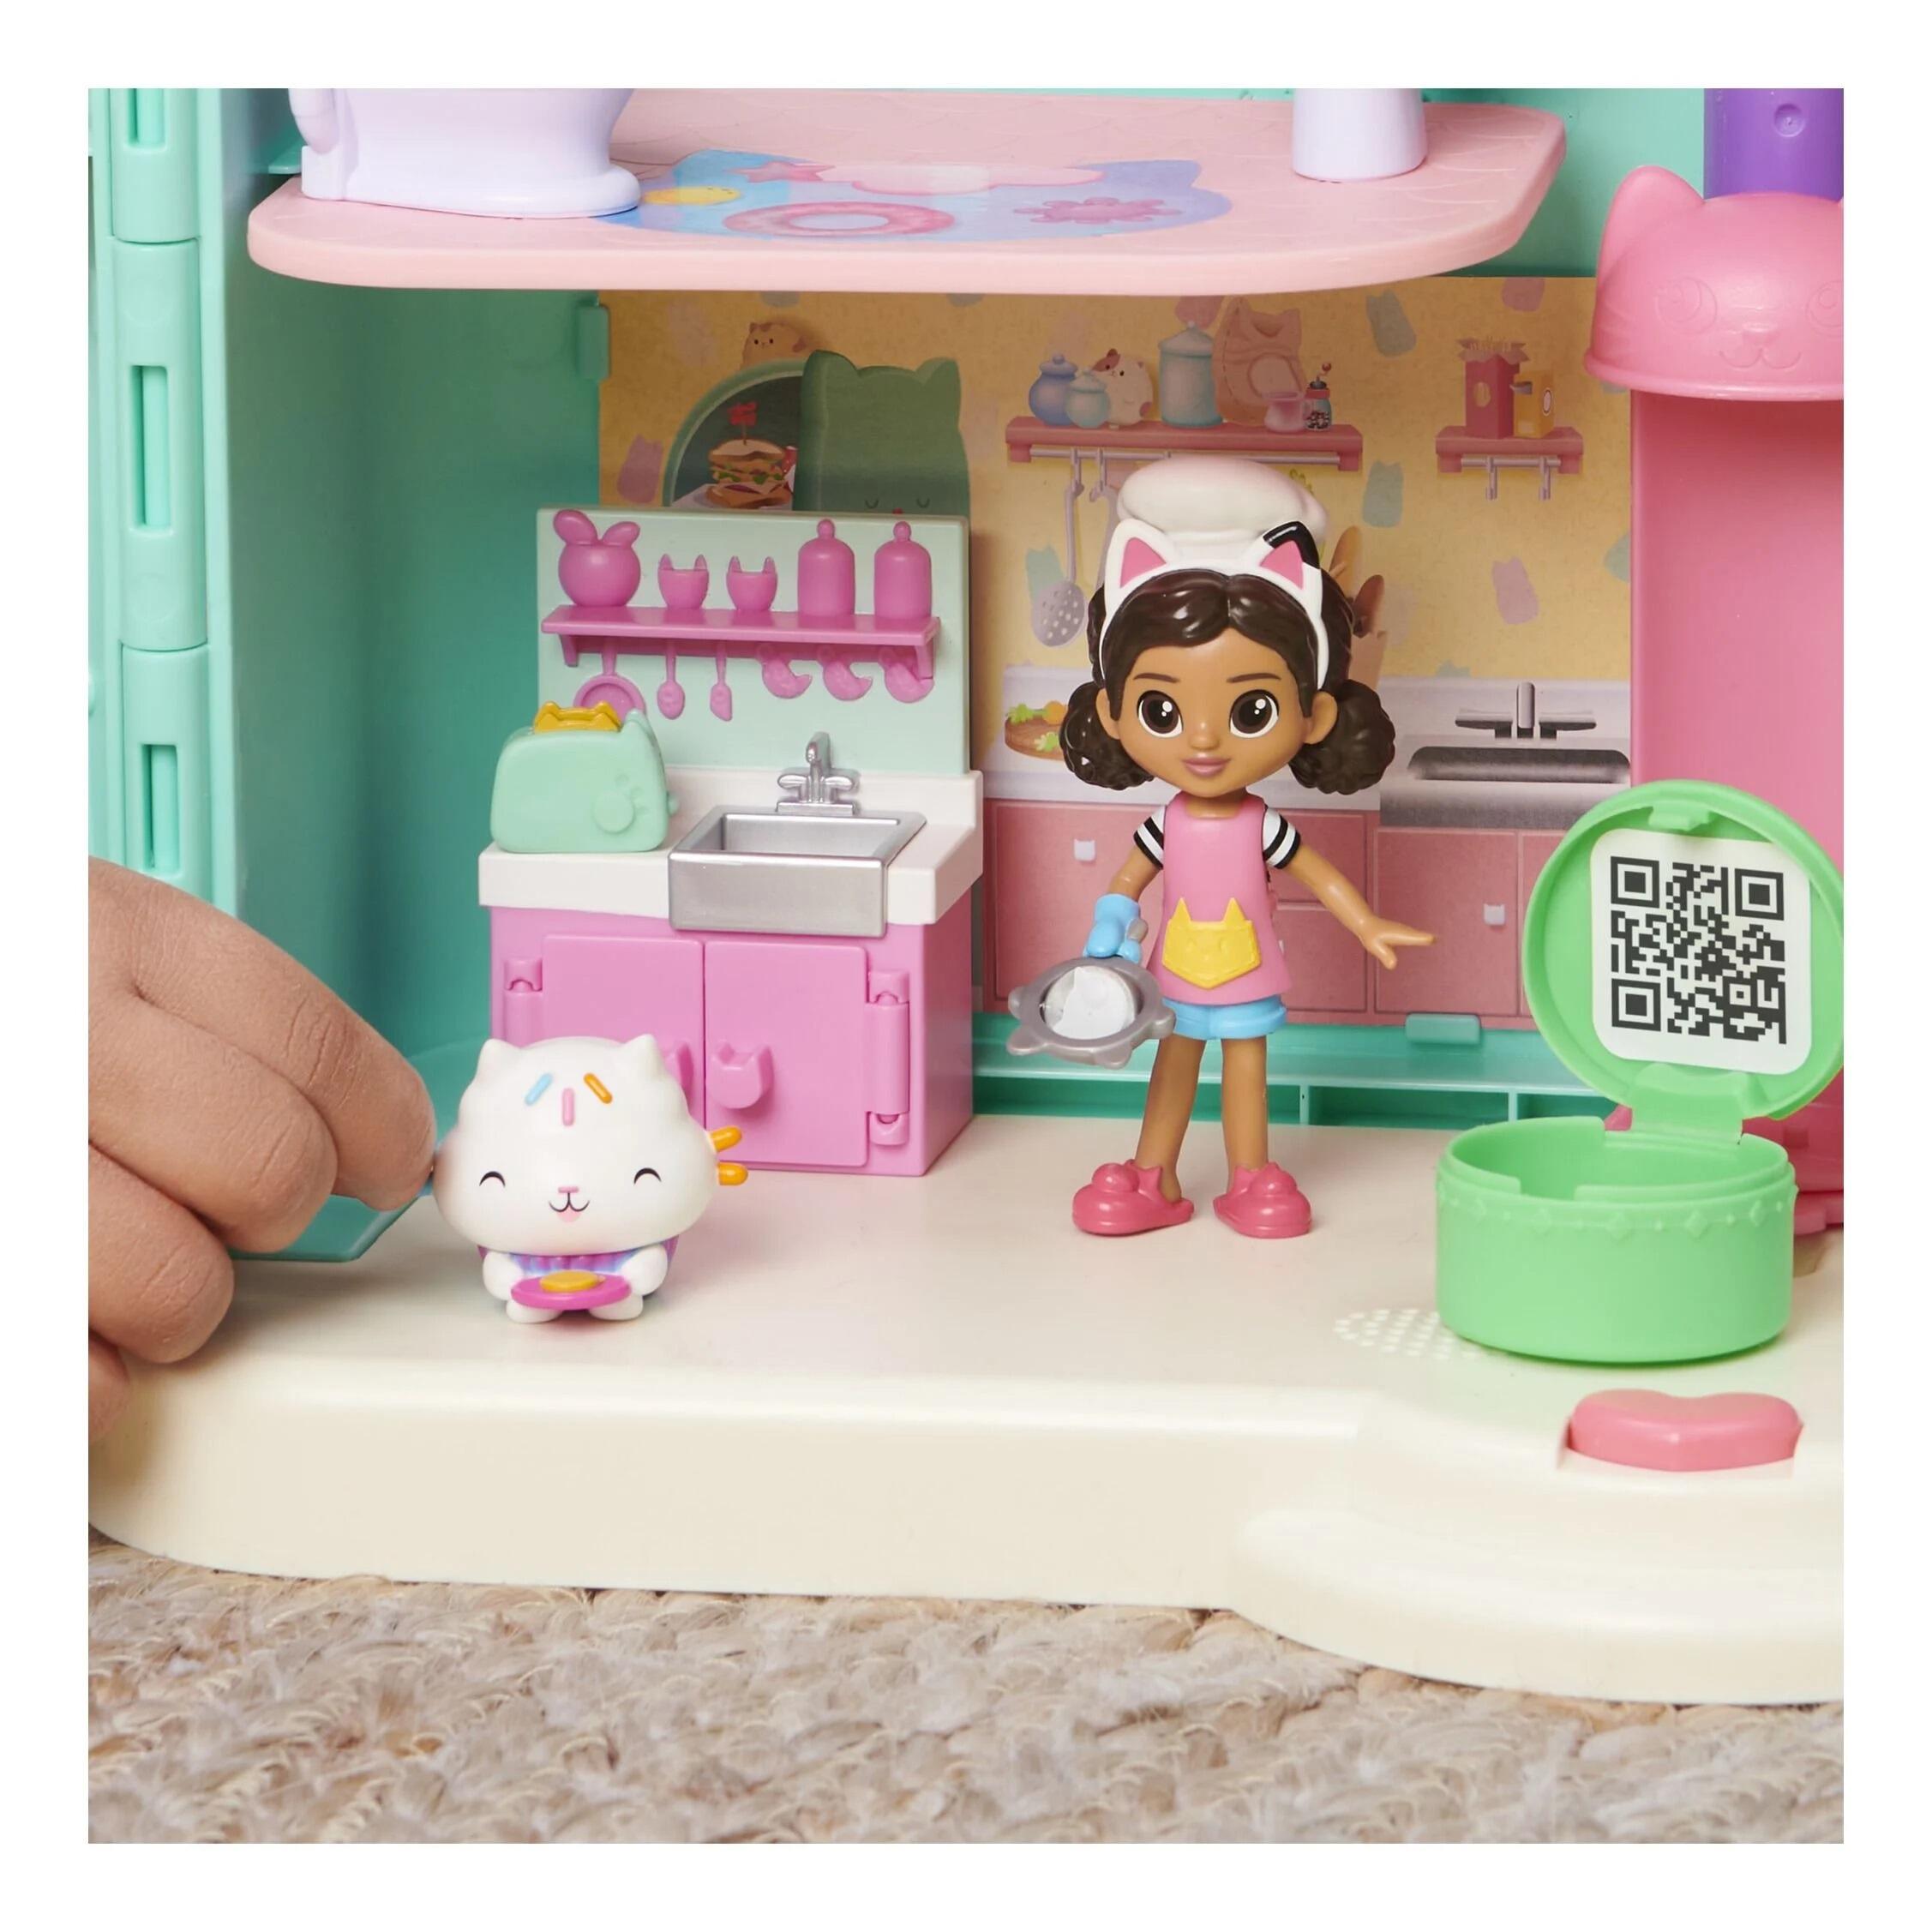 Gabby's Dollhouse Lunch and Munch Playset with Surprise